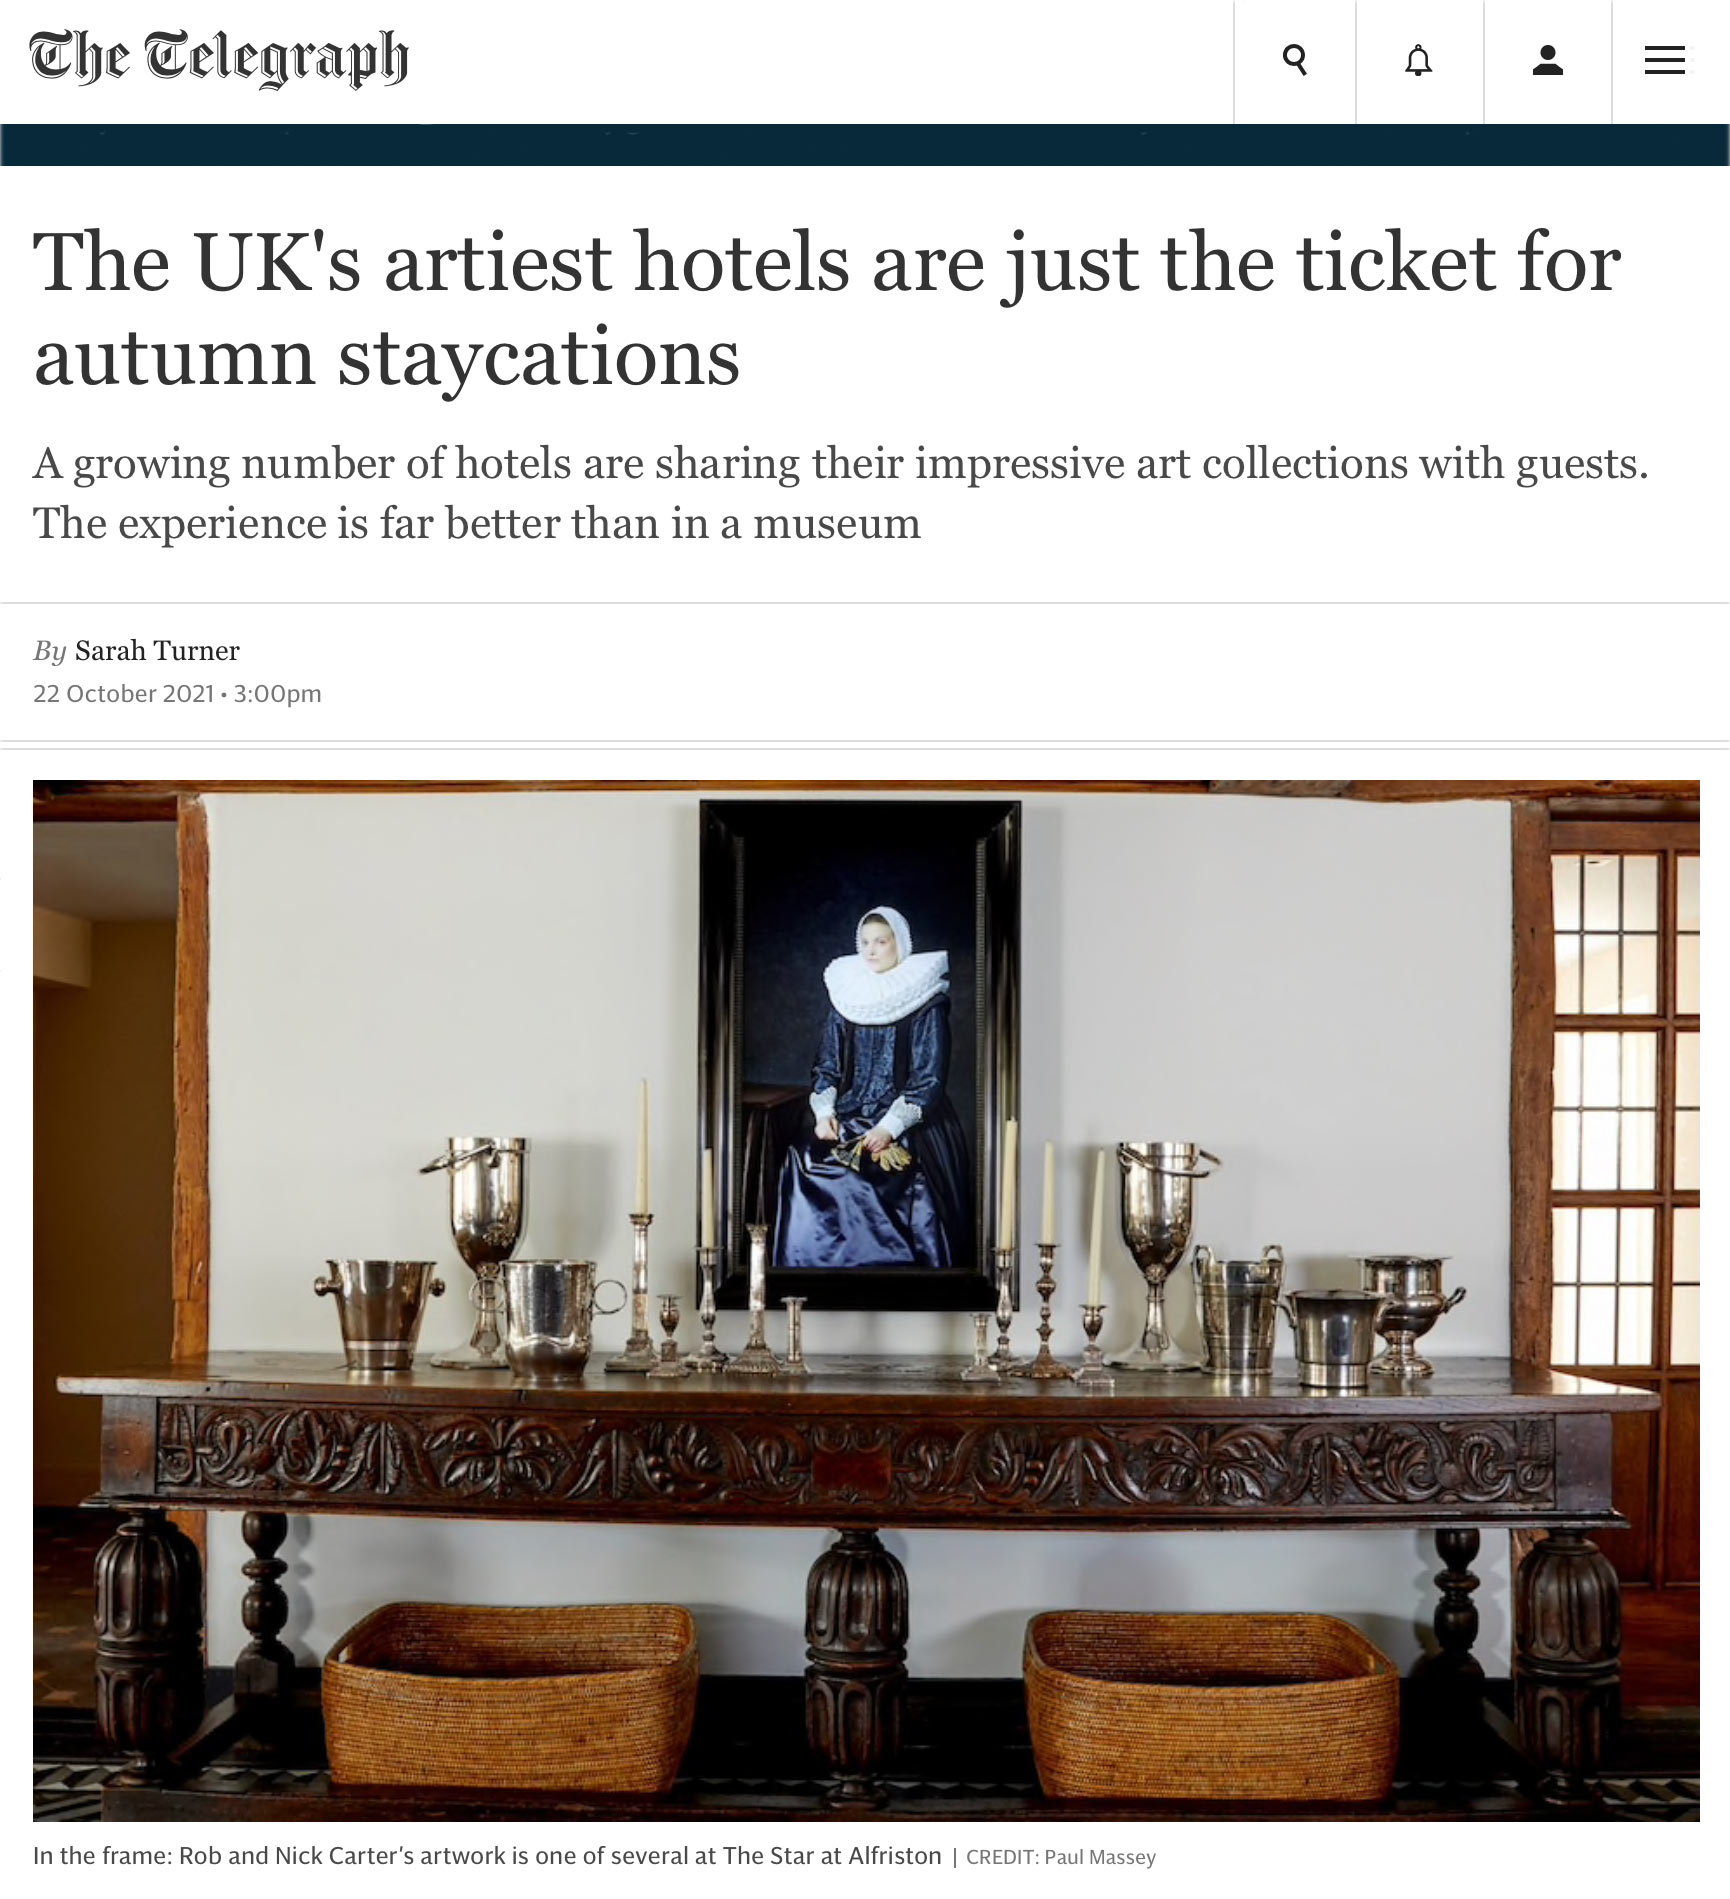 Rob and Nick Carter -  FThe UK's artiest hotels are just the ticket for autumn staycations, The Telegraph (online) · © Copyright 2022